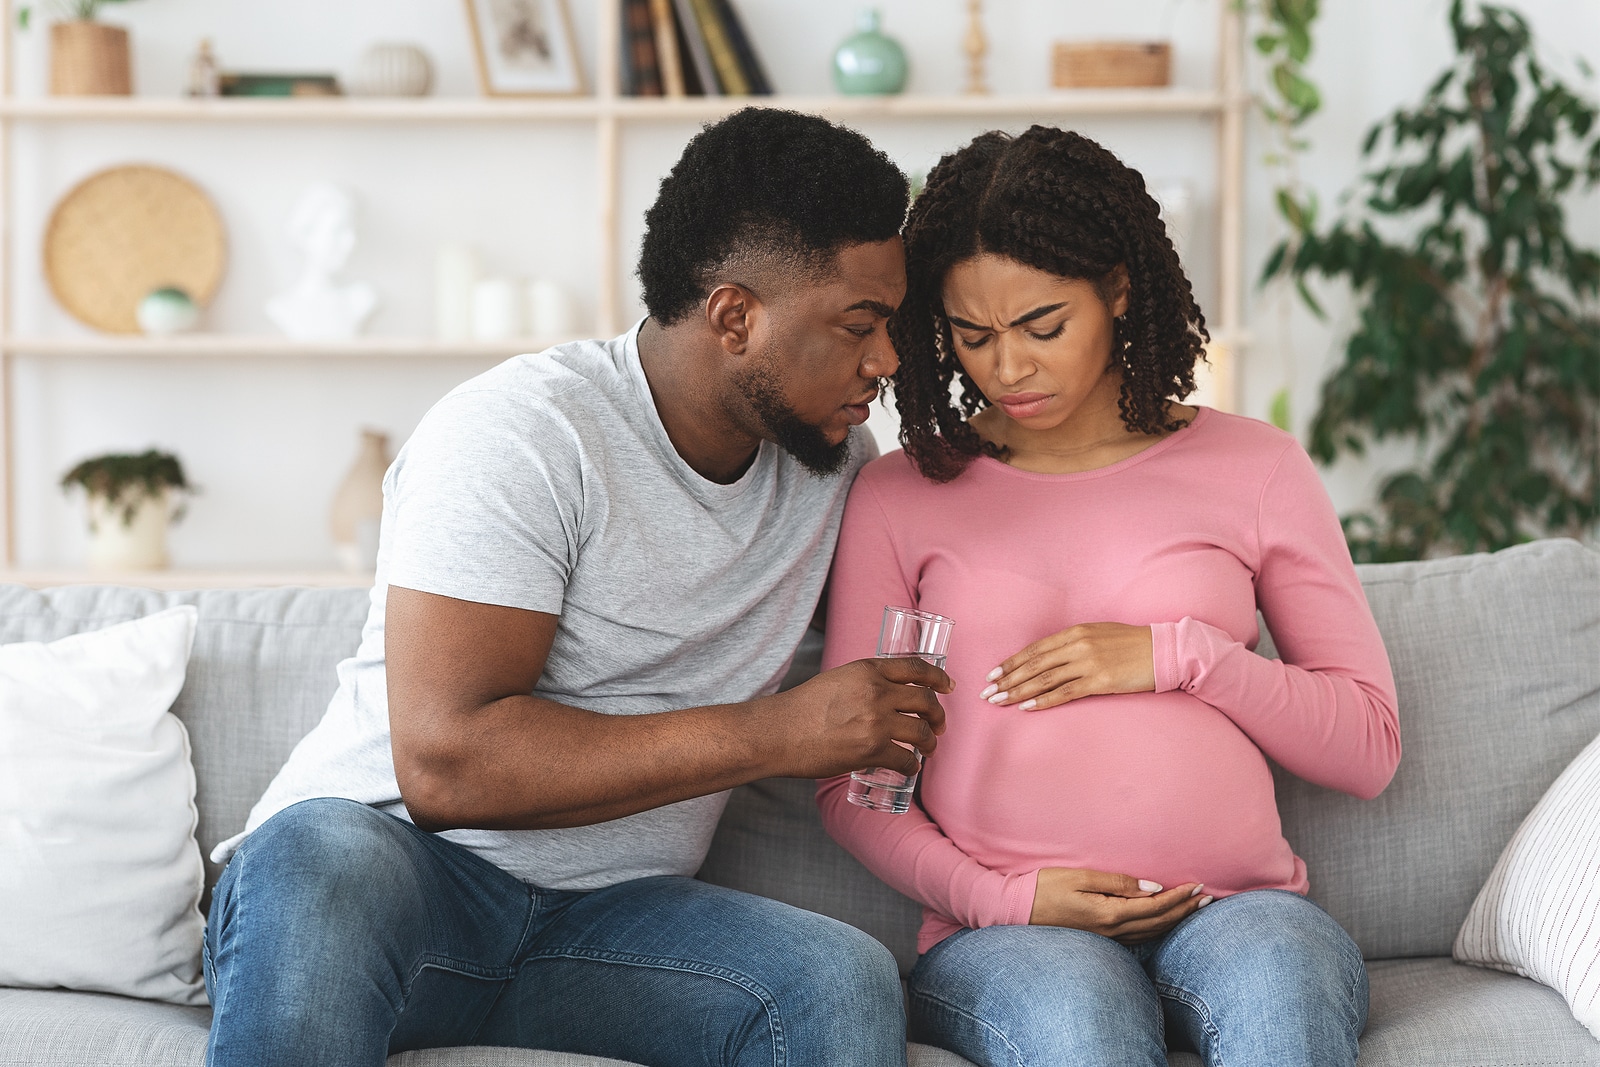 Care, support in couple during pregnancy. Black expecting wife feeling sick, husband giving her glass of water, home interior, free space. African american man supporting his woman during pregnancy. We help boost SEO for birth workers including doulas, midwives, postpartum therapists, postpartum support, prenatal yoga instructors, childbirth educators, lactation consultants, placenta encapsulation professionals and more.